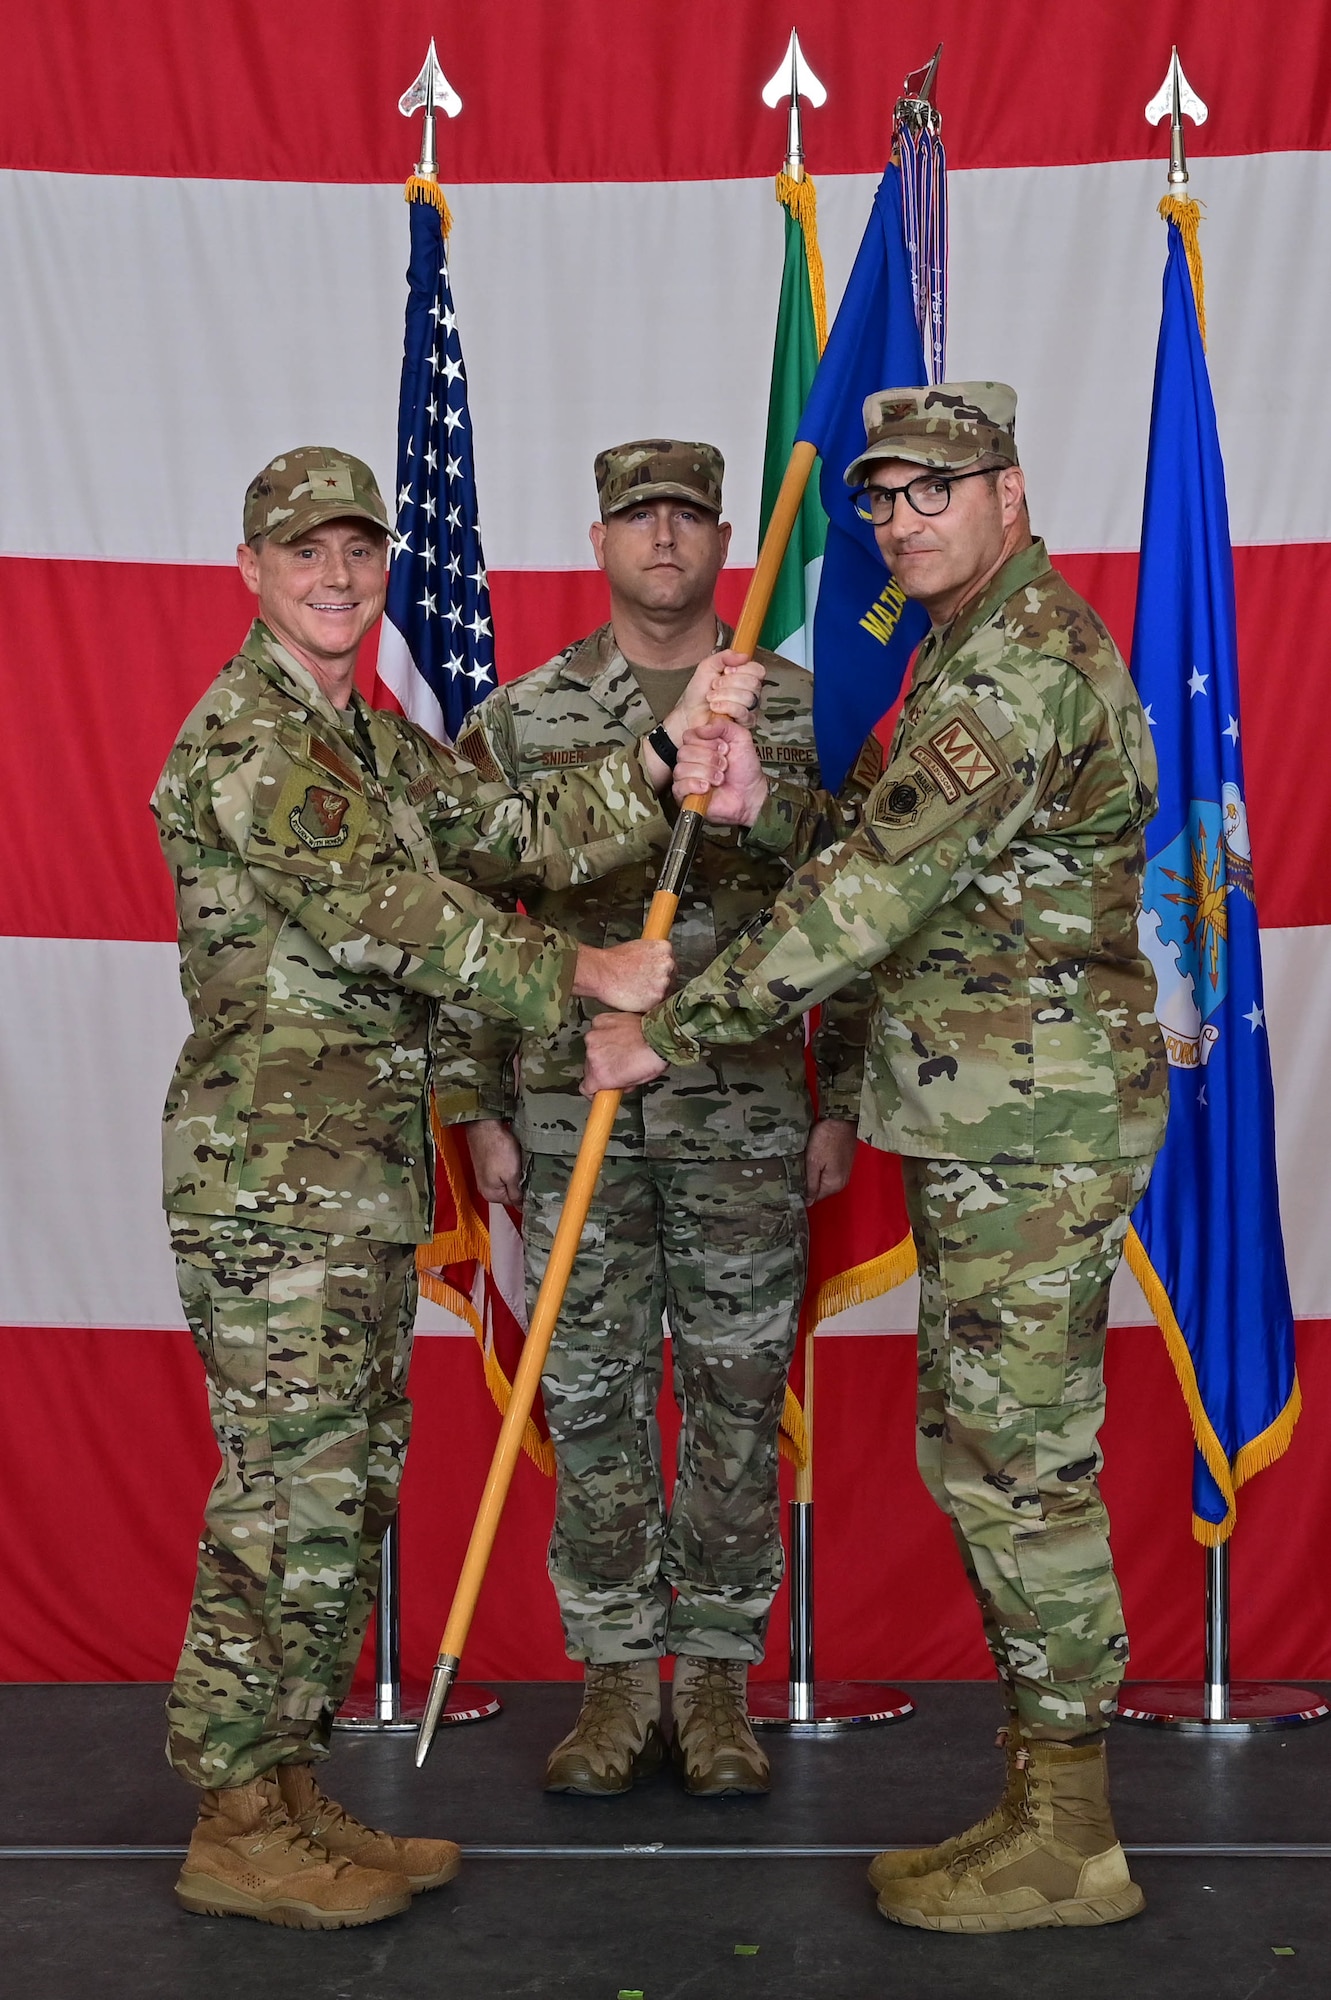 U.S. Air Force Brig. Gen. Tad Clark, 31st Fighter Wing commander, passes the guidon to U.S. Air Force Col. Joe Stangl, 31st Maintenance Group incoming commander, to symbolize the changing of command at Aviano Air Base, Italy, June 15, 2023. The 31st Maintenance Group maintains combat capability for 56 combat-coded F-16 and HH-60 aircraft and provides force infrastructure support for 1,600 military and civilian personnel assigned to 4 squadrons, including one geographically separated. (U.S. Air Force photo by Airman Zachary Jakel)